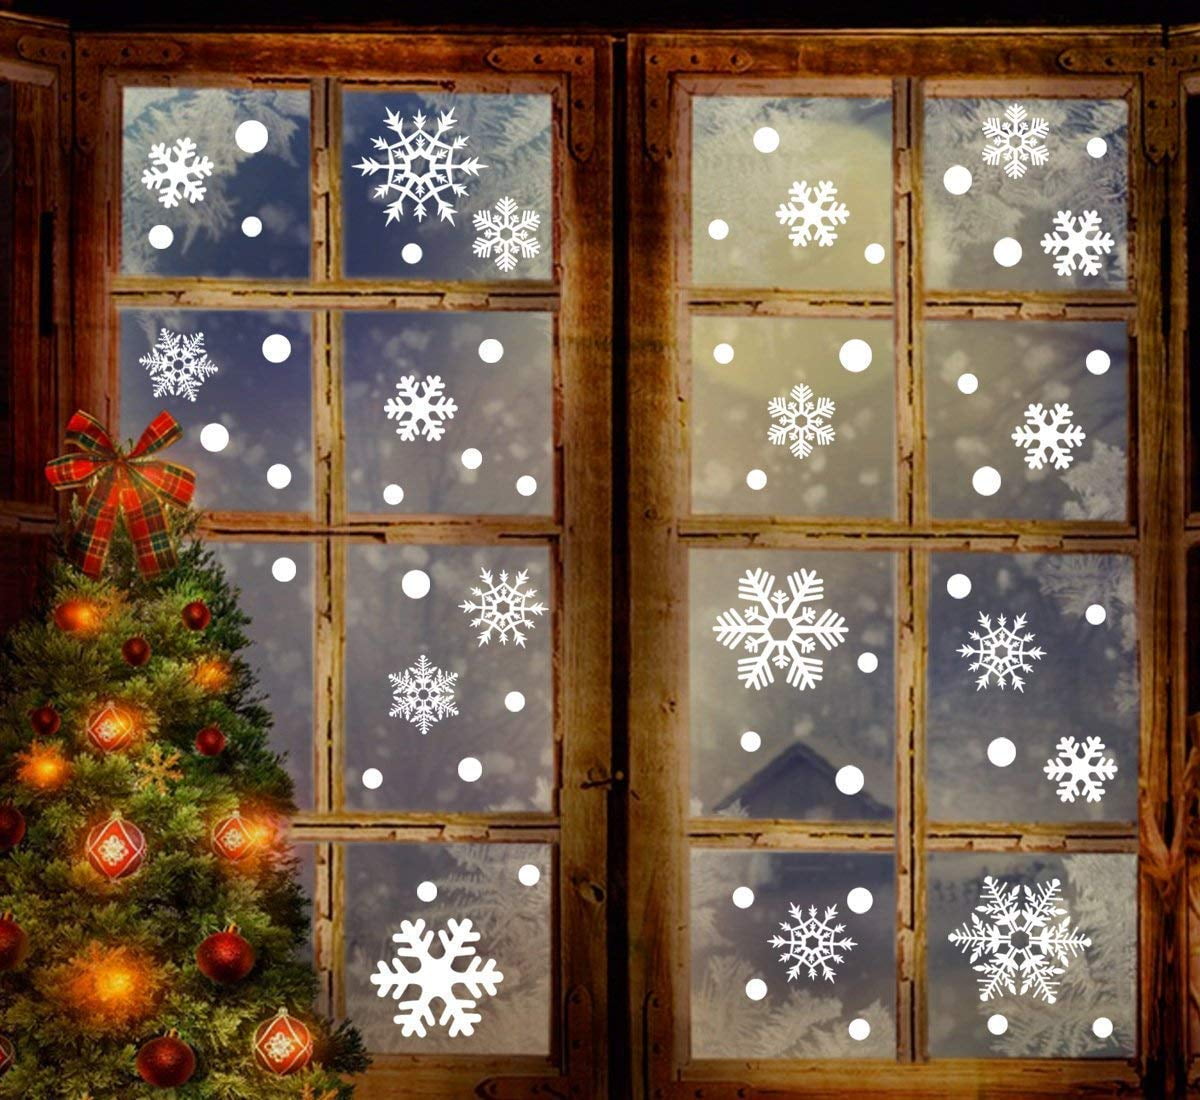 IDOXE 8 Sheets Christmas Window Clings White Snowflakes Decal Stickers Winter Wonderland Decorations Ornaments Party Supplies 